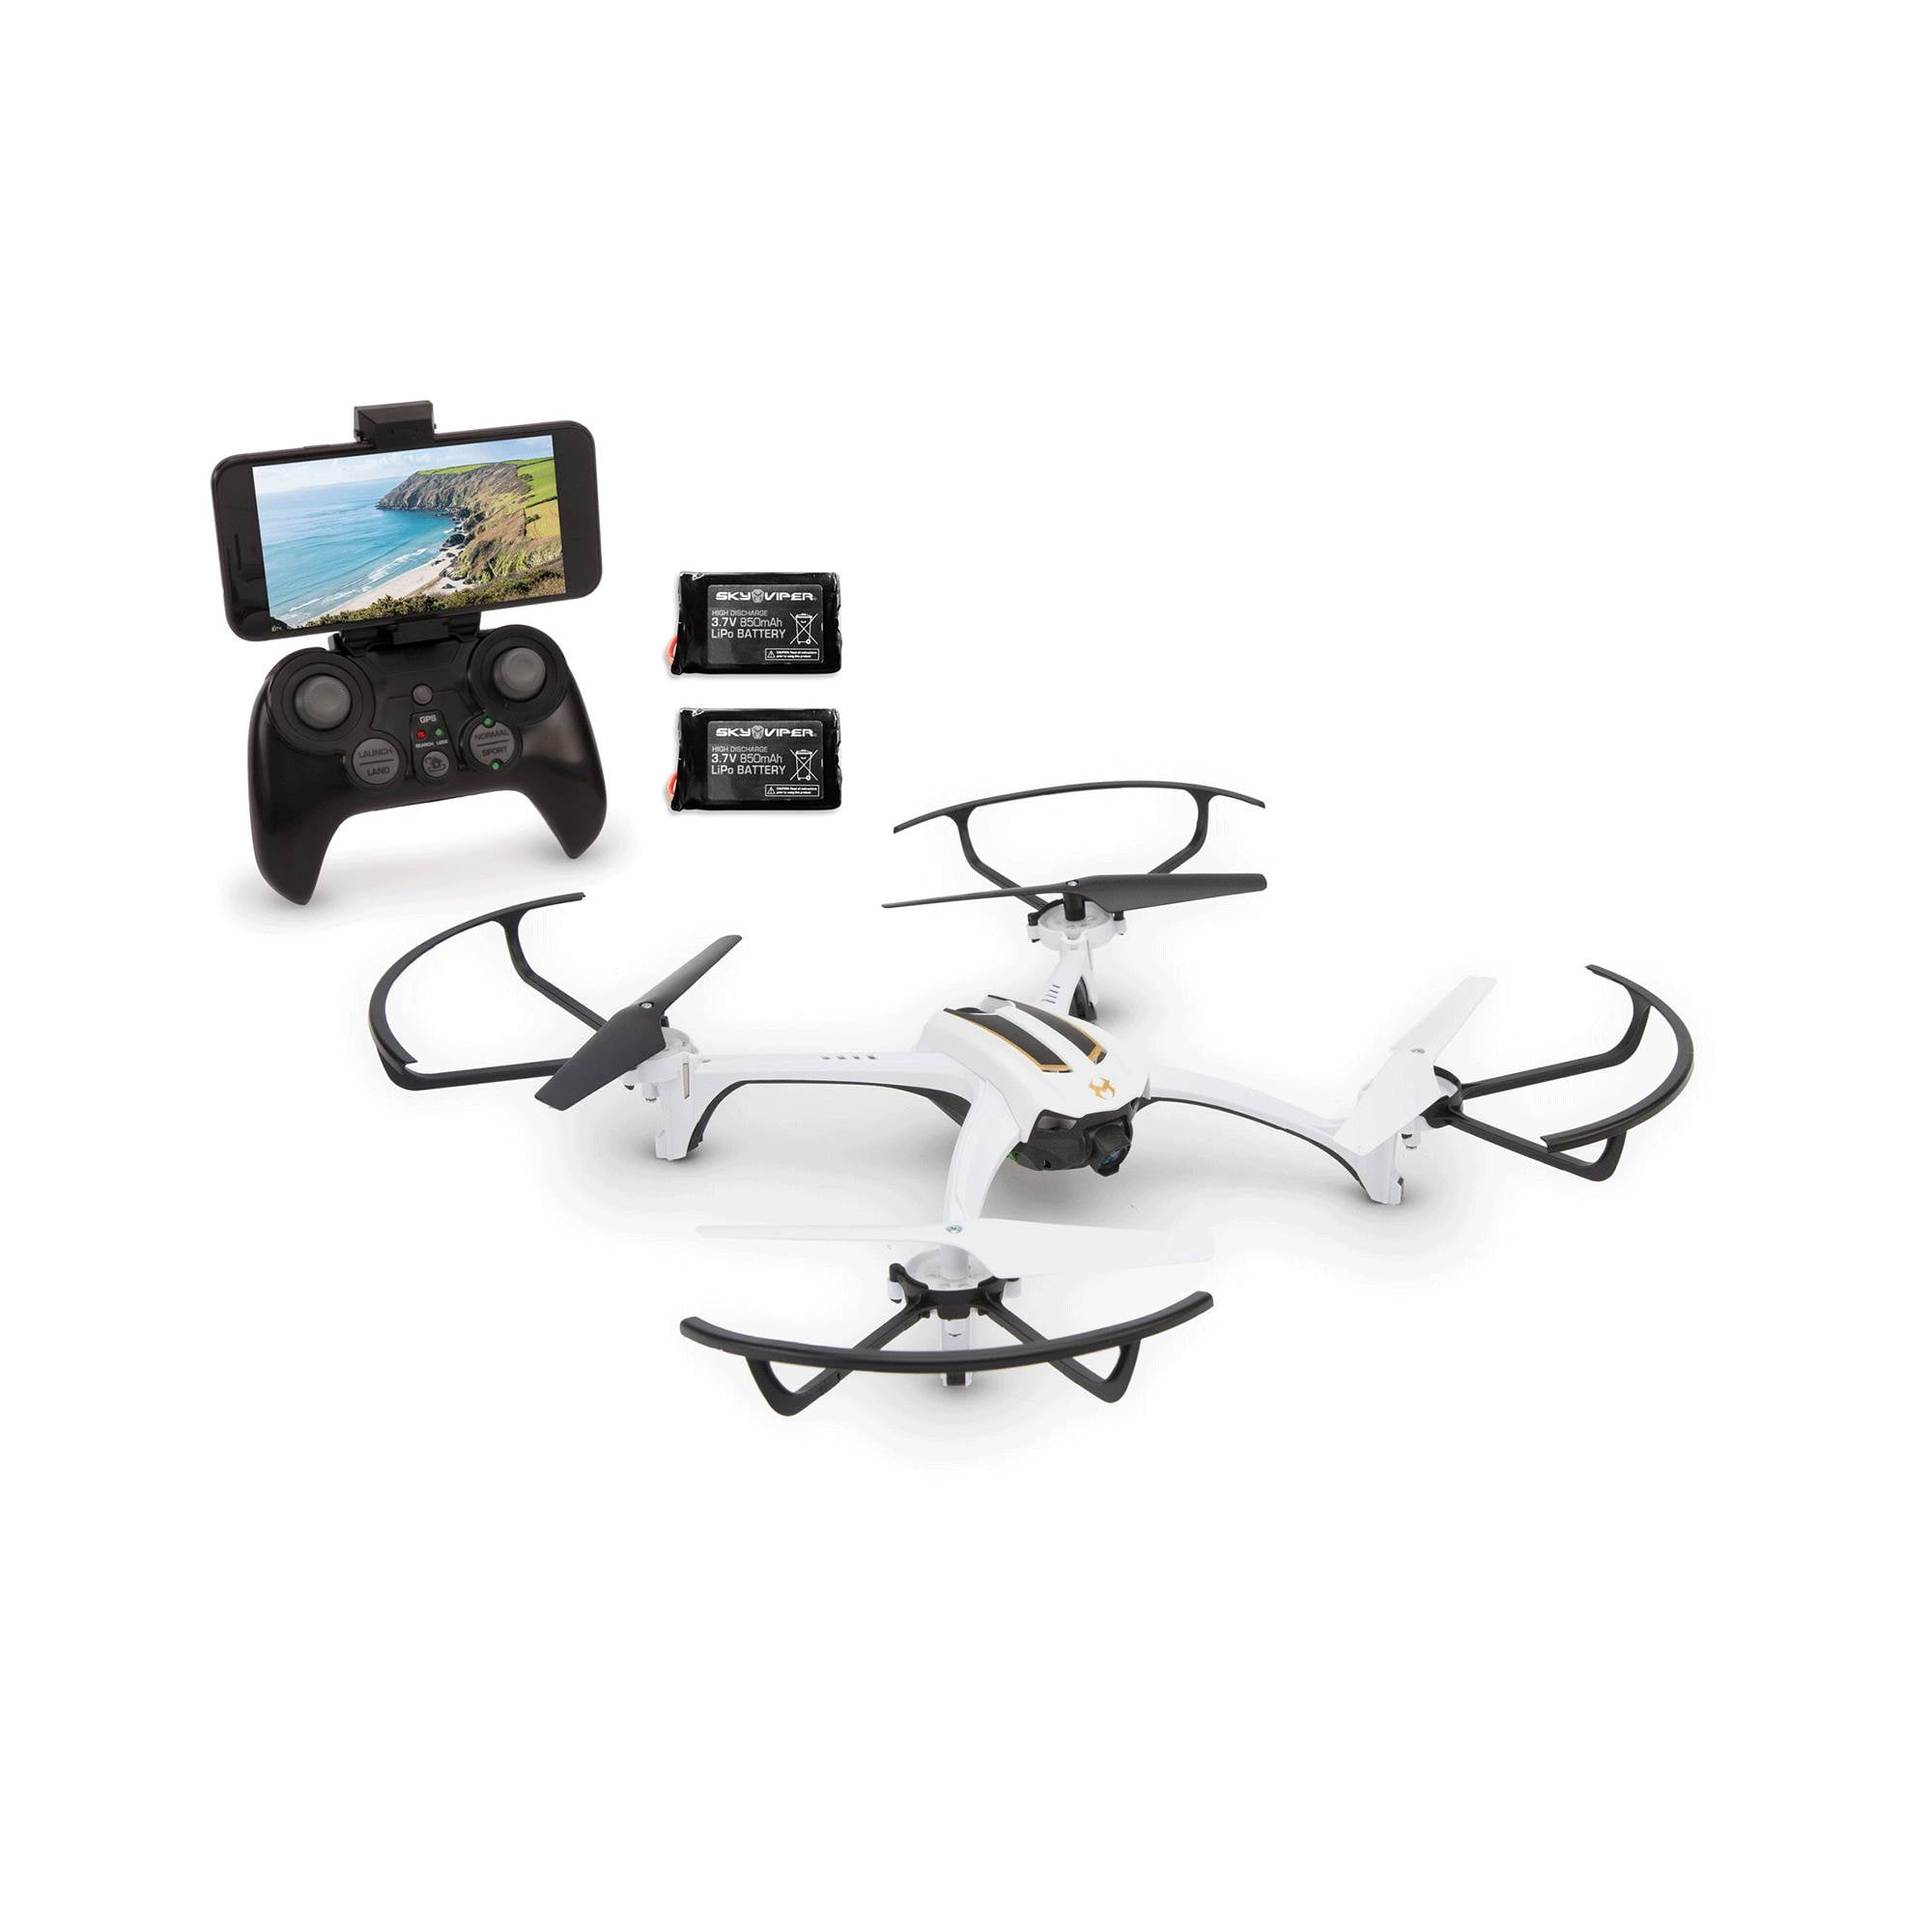 Sky Viper Journey Pro GPS Live Streaming Video Recording Drone and 2 Batteries